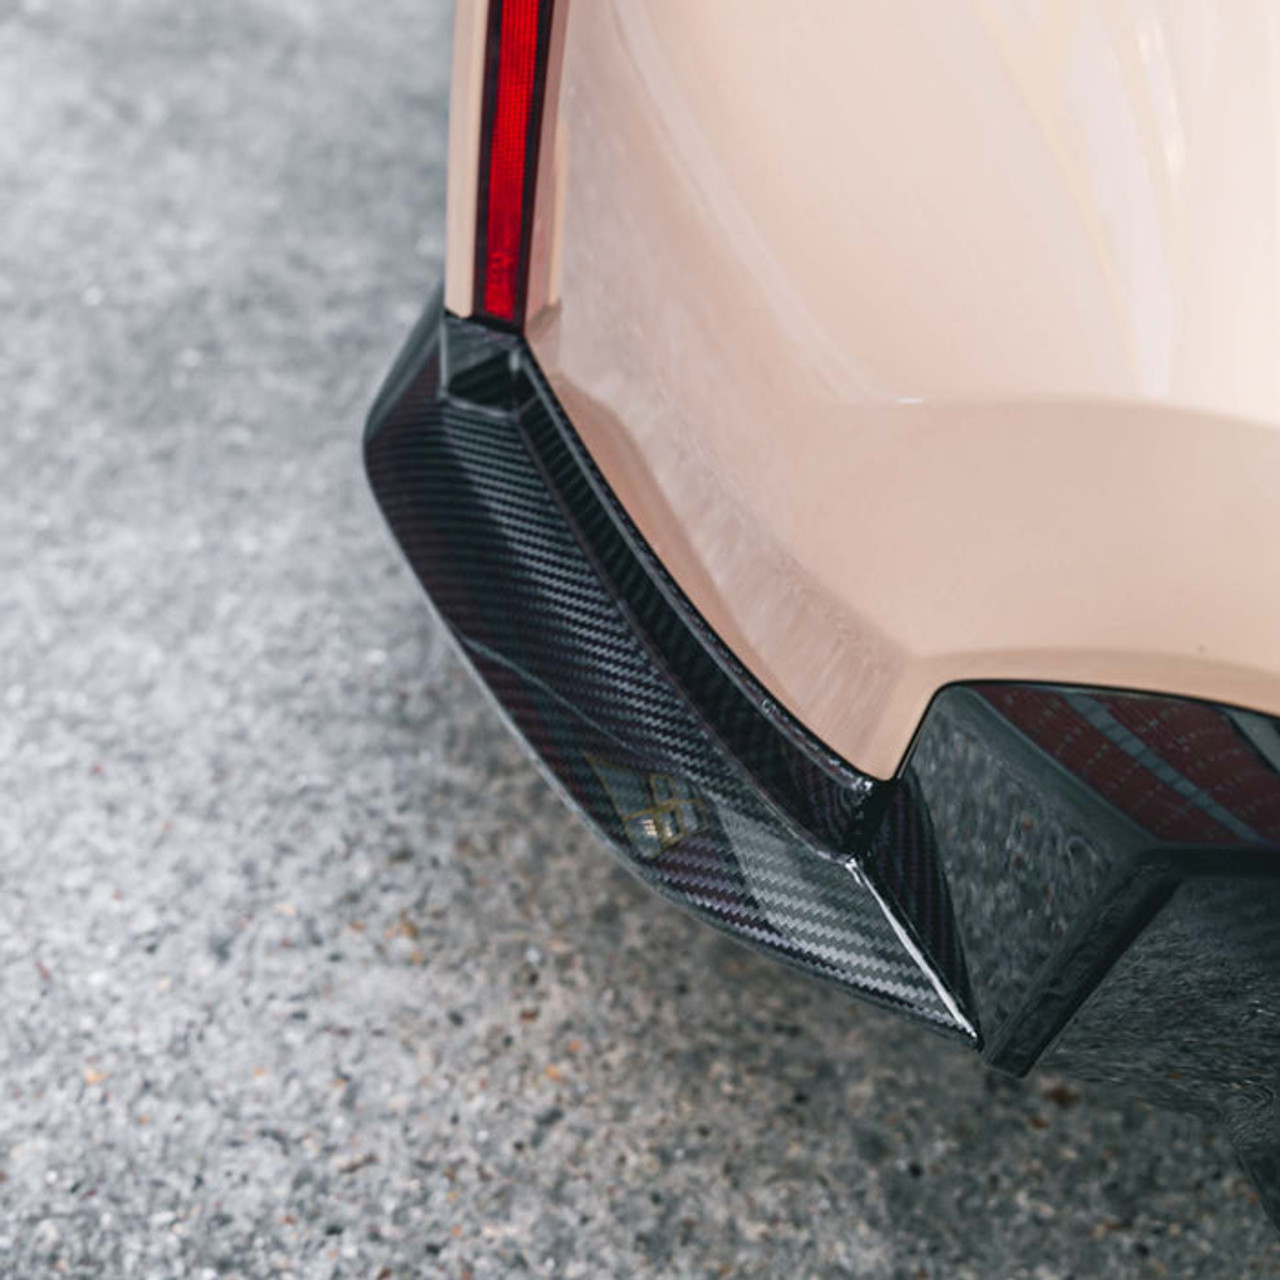 MHC PLUS BMW G80 M3 OEM STYLE REAR SIDE DIFFUSER CORNER REPLACEMENTS IN PRE PREG CARBON FIBRE extreme power house discount code m3list